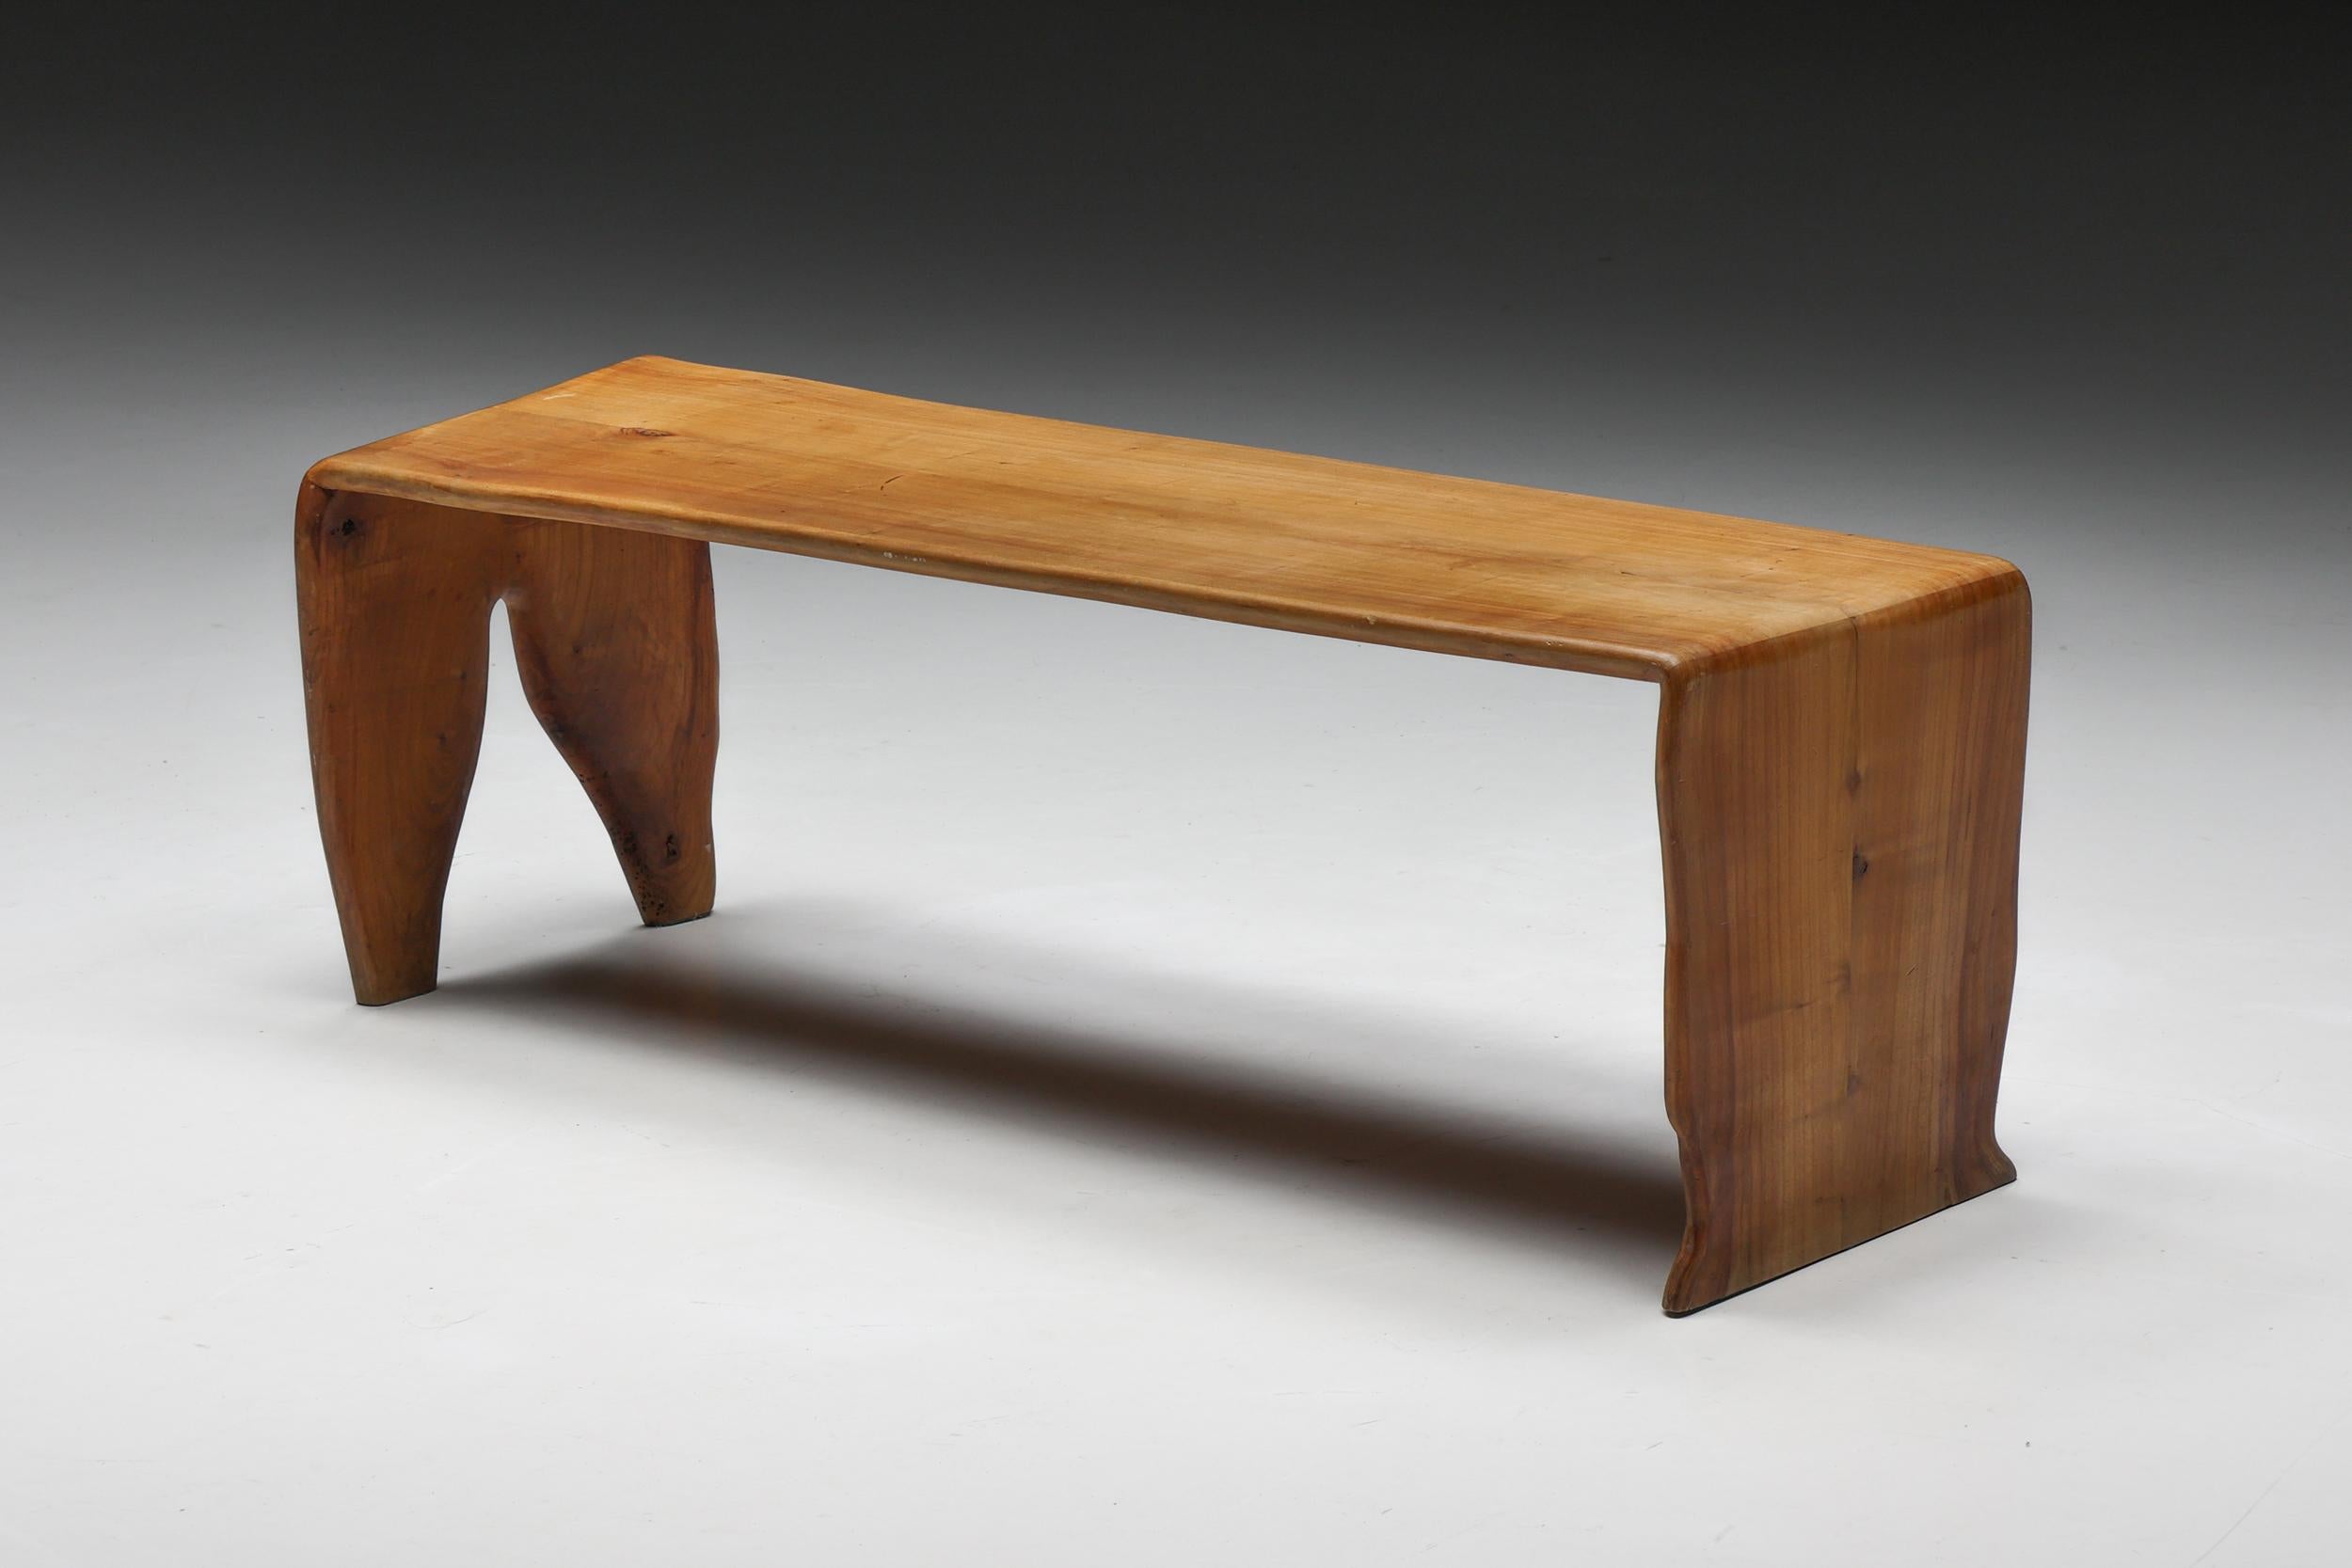 Sculptural; Elmwood; Coffee Table; 1970s; Craftsmanship; Solid Elmwood; Curved Design; Organic; Organically Shaped; Minimal; Minimalistic; 

A sculptural coffee table made of solid elmwood, characterized by its minimal and clean approach that